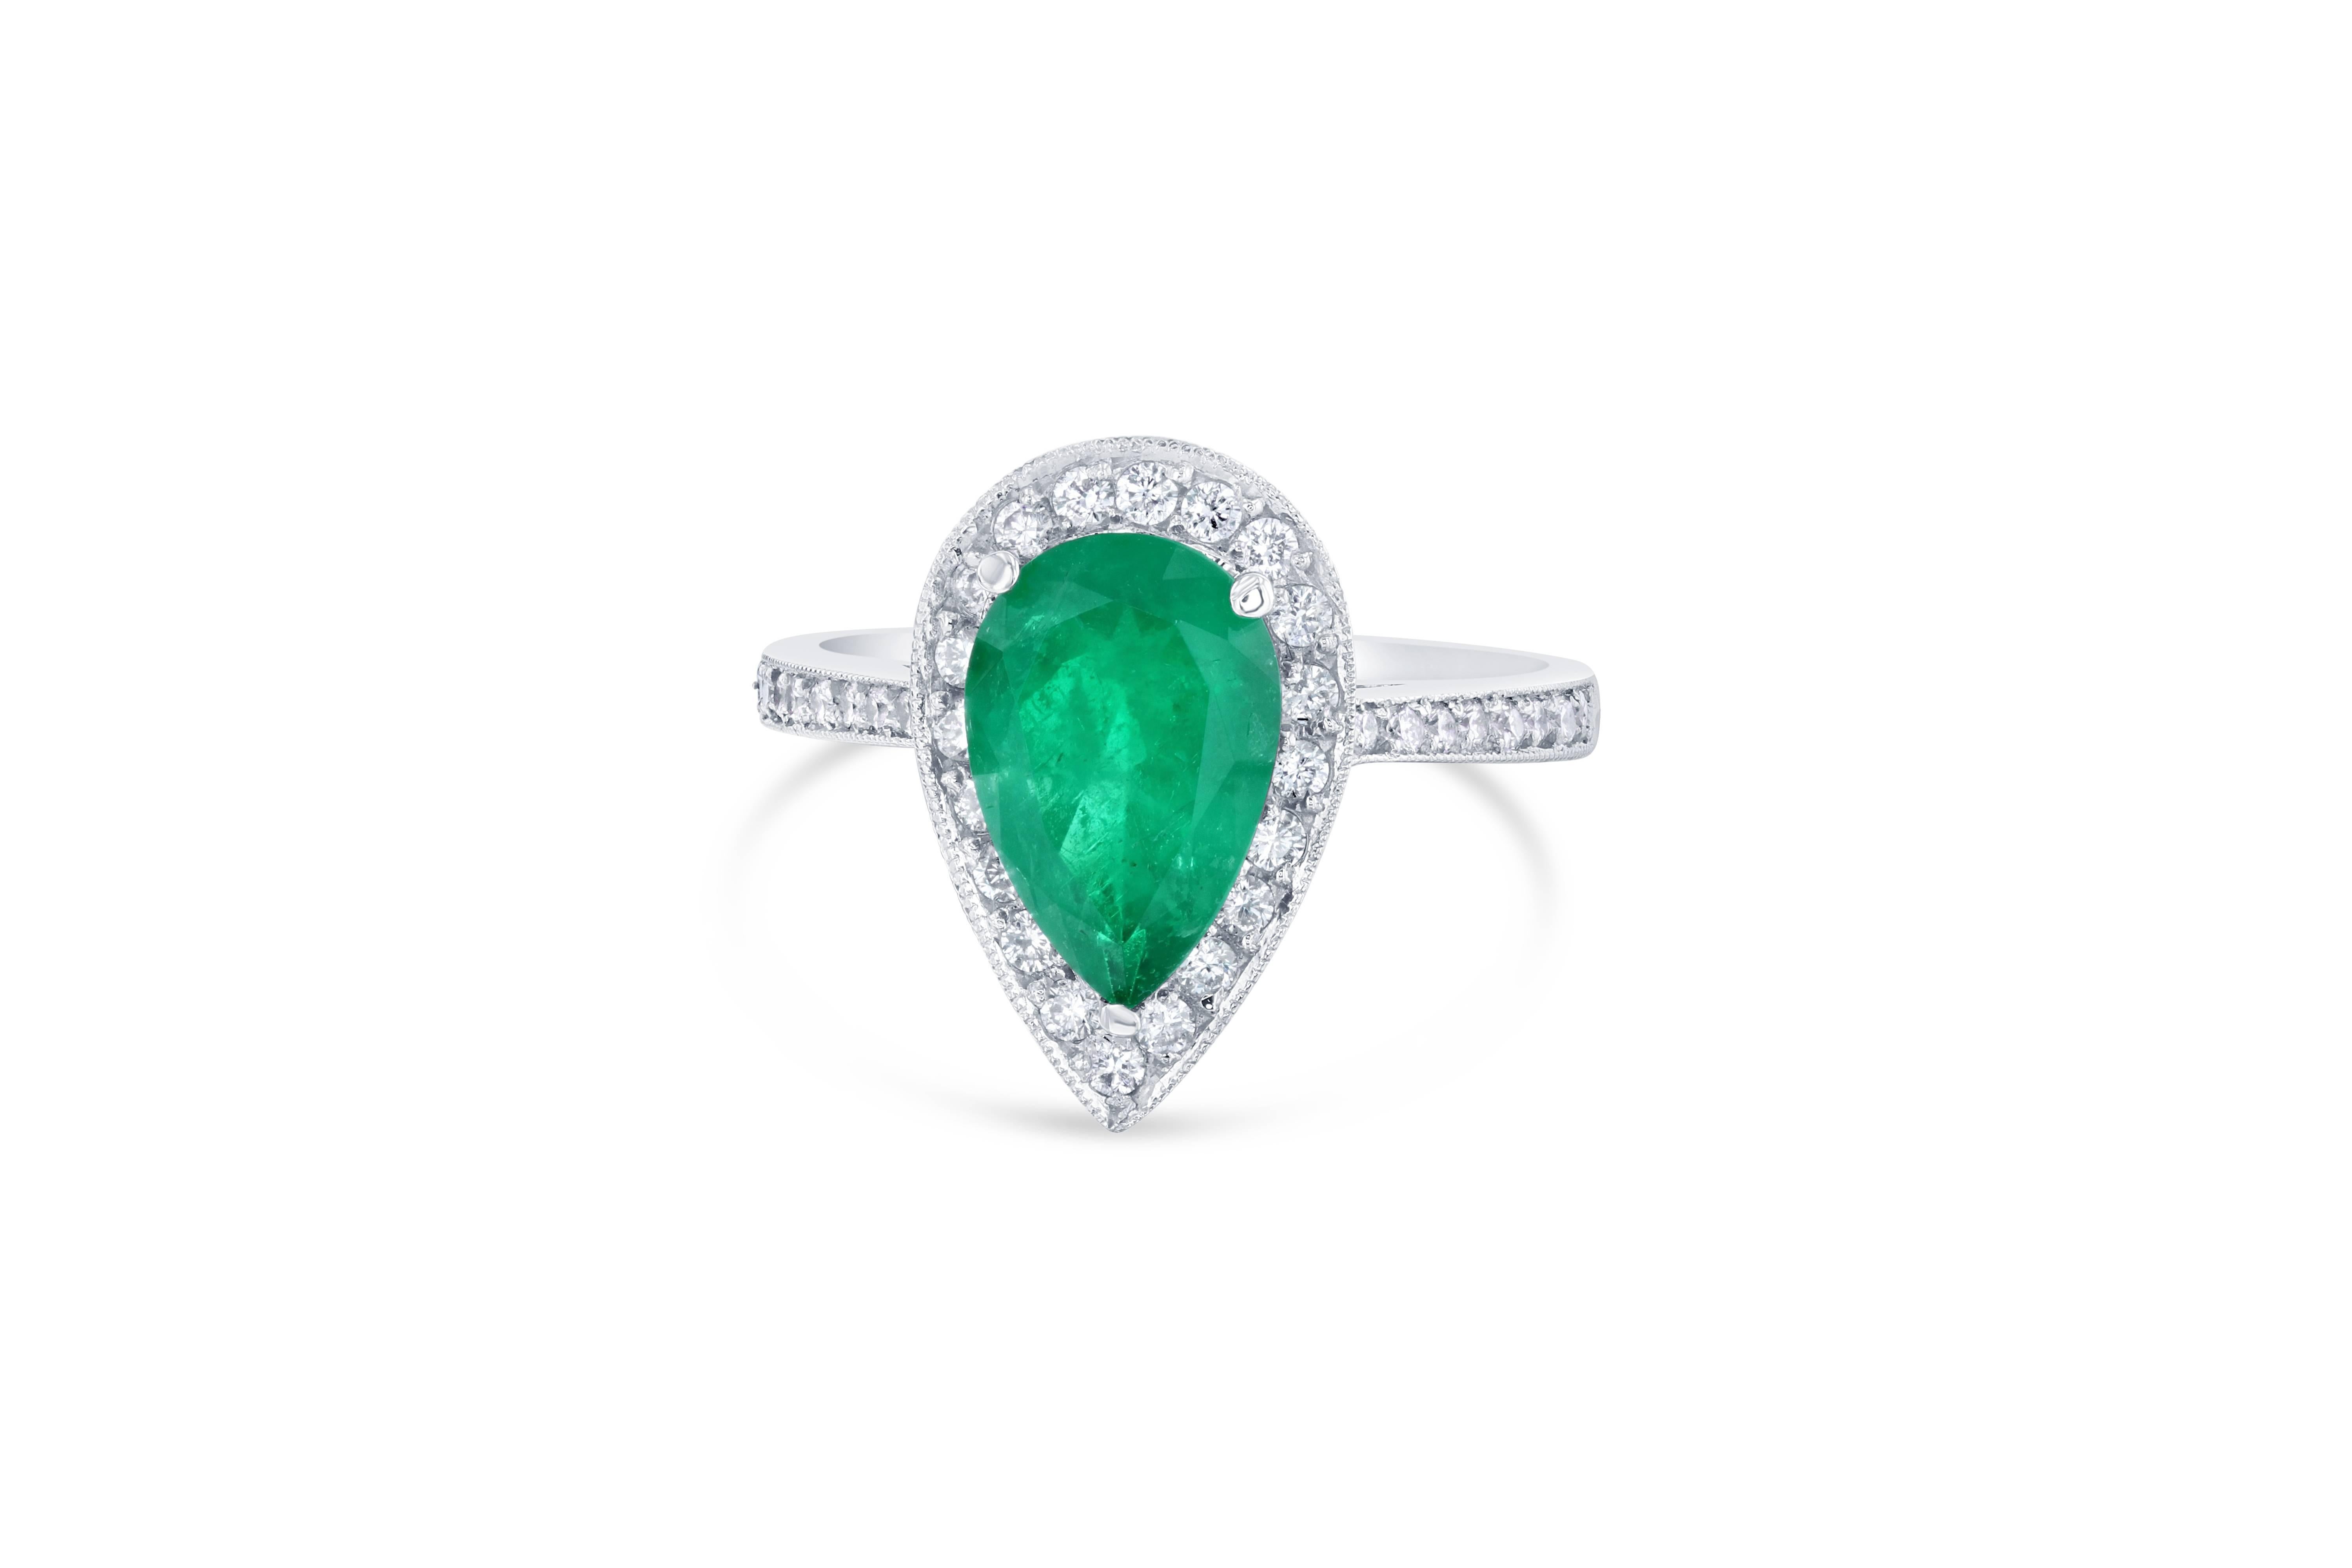 This is a gorgeous, gorgeous, gorgeous Colombian Emerald and Diamond Ring!  This 18K White Gold Ring has a stunning GIA certified Pear Cut Emerald that weighs 1.87 carats. It has 75 Round Cut Diamonds that weigh 0.69 carat (Clarity: VS2, Color: F). 